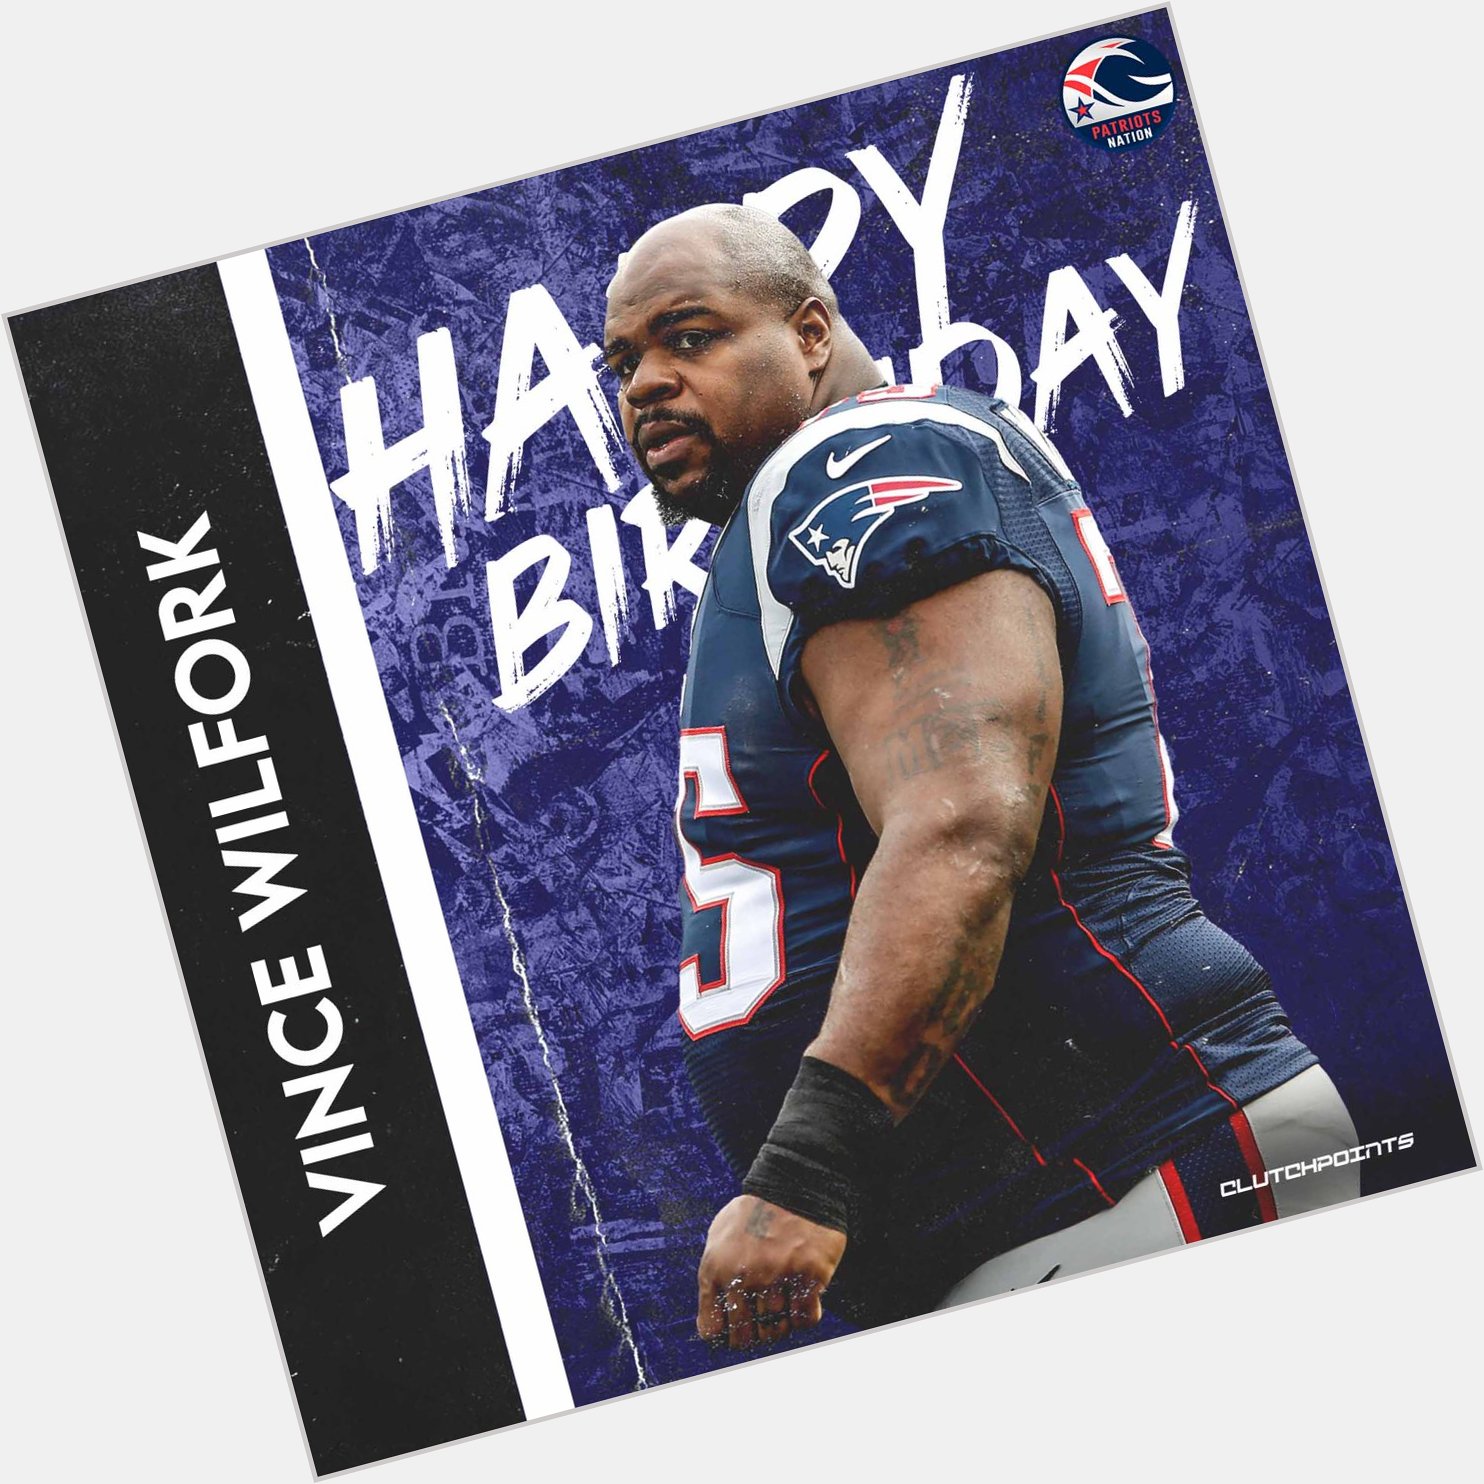 Happy birthday to one and only, 2x SuperBowl champ, Vince Wilfork 